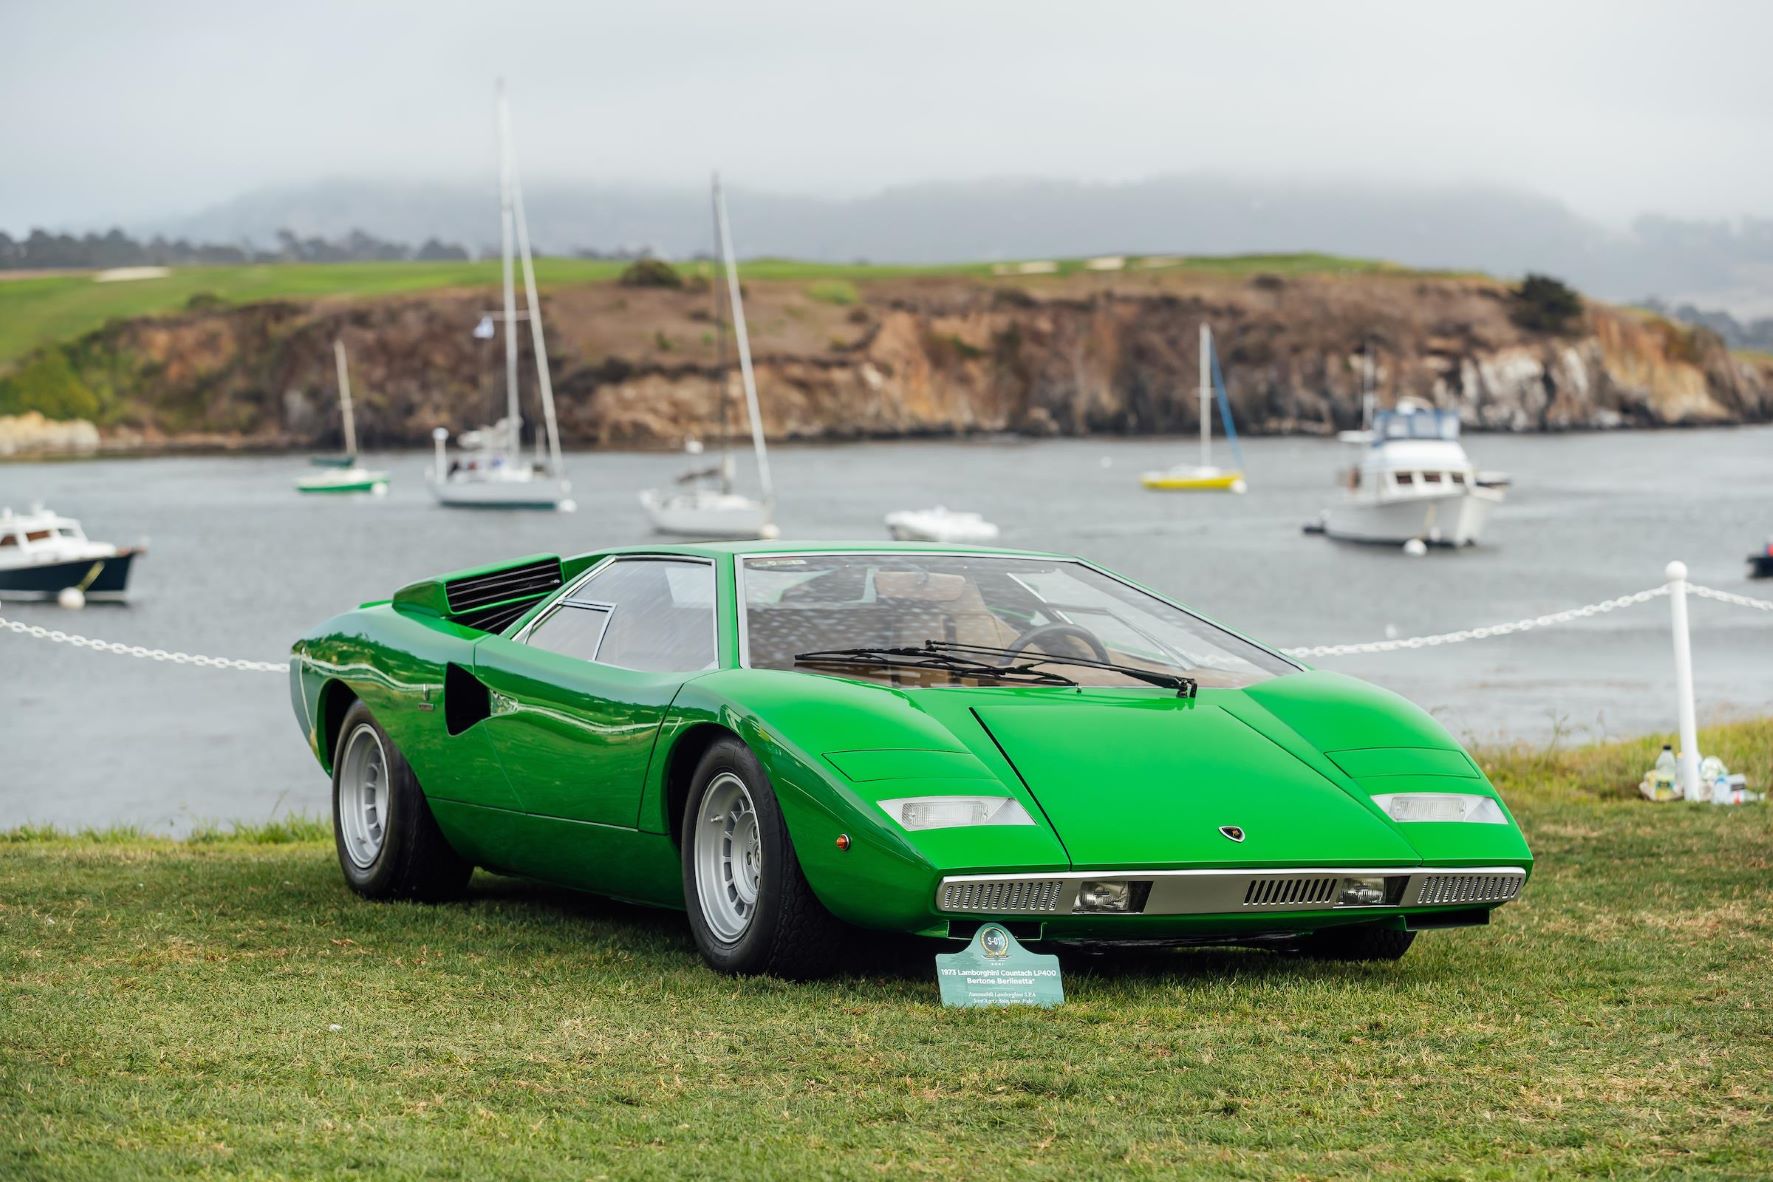 The very first Lamborghini Countach ever made